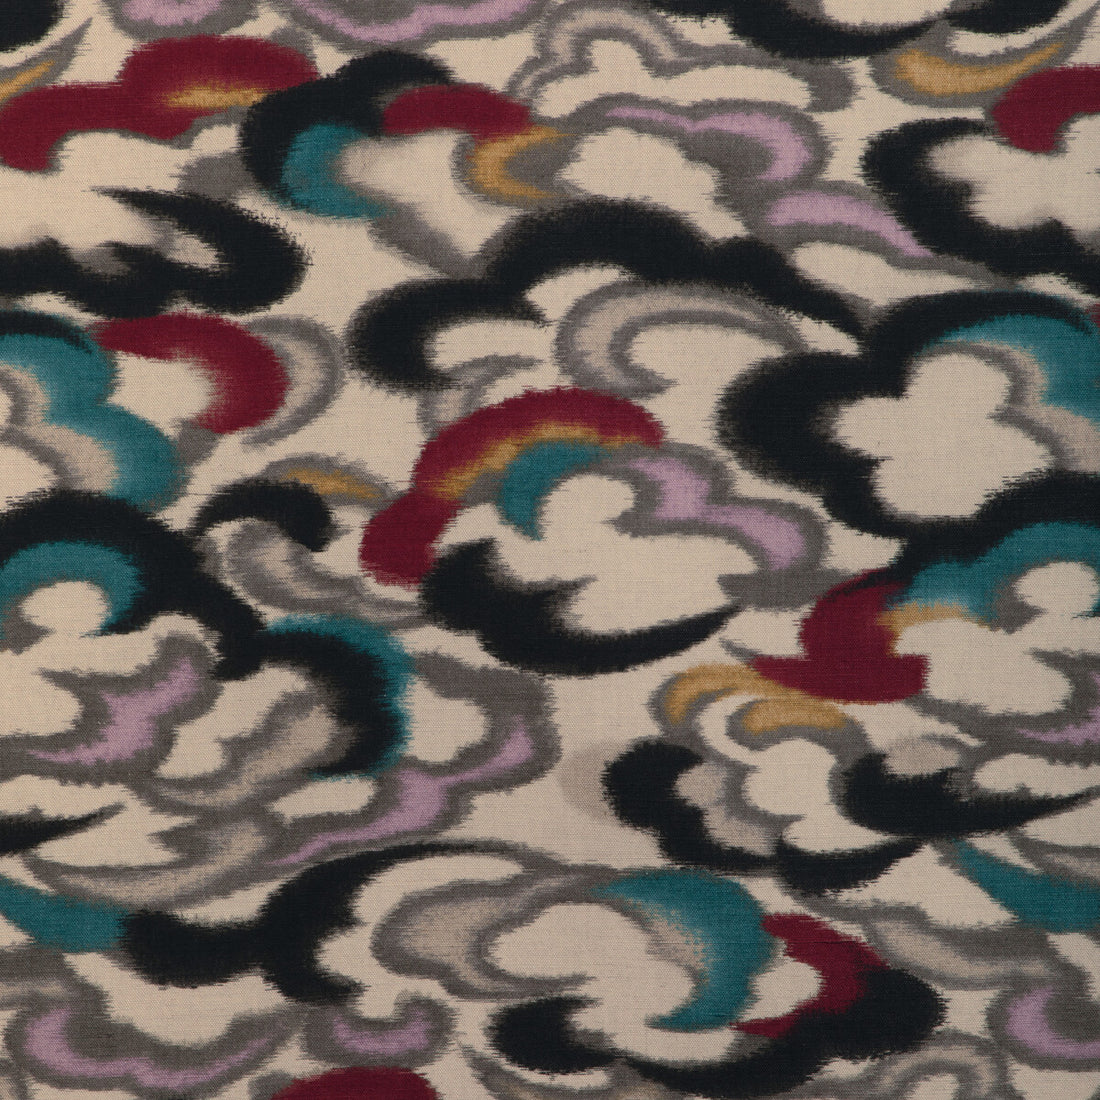 Stratus Print fabric in teal/multi color - pattern 8023138.913.0 - by Brunschwig &amp; Fils in the Celeste collection